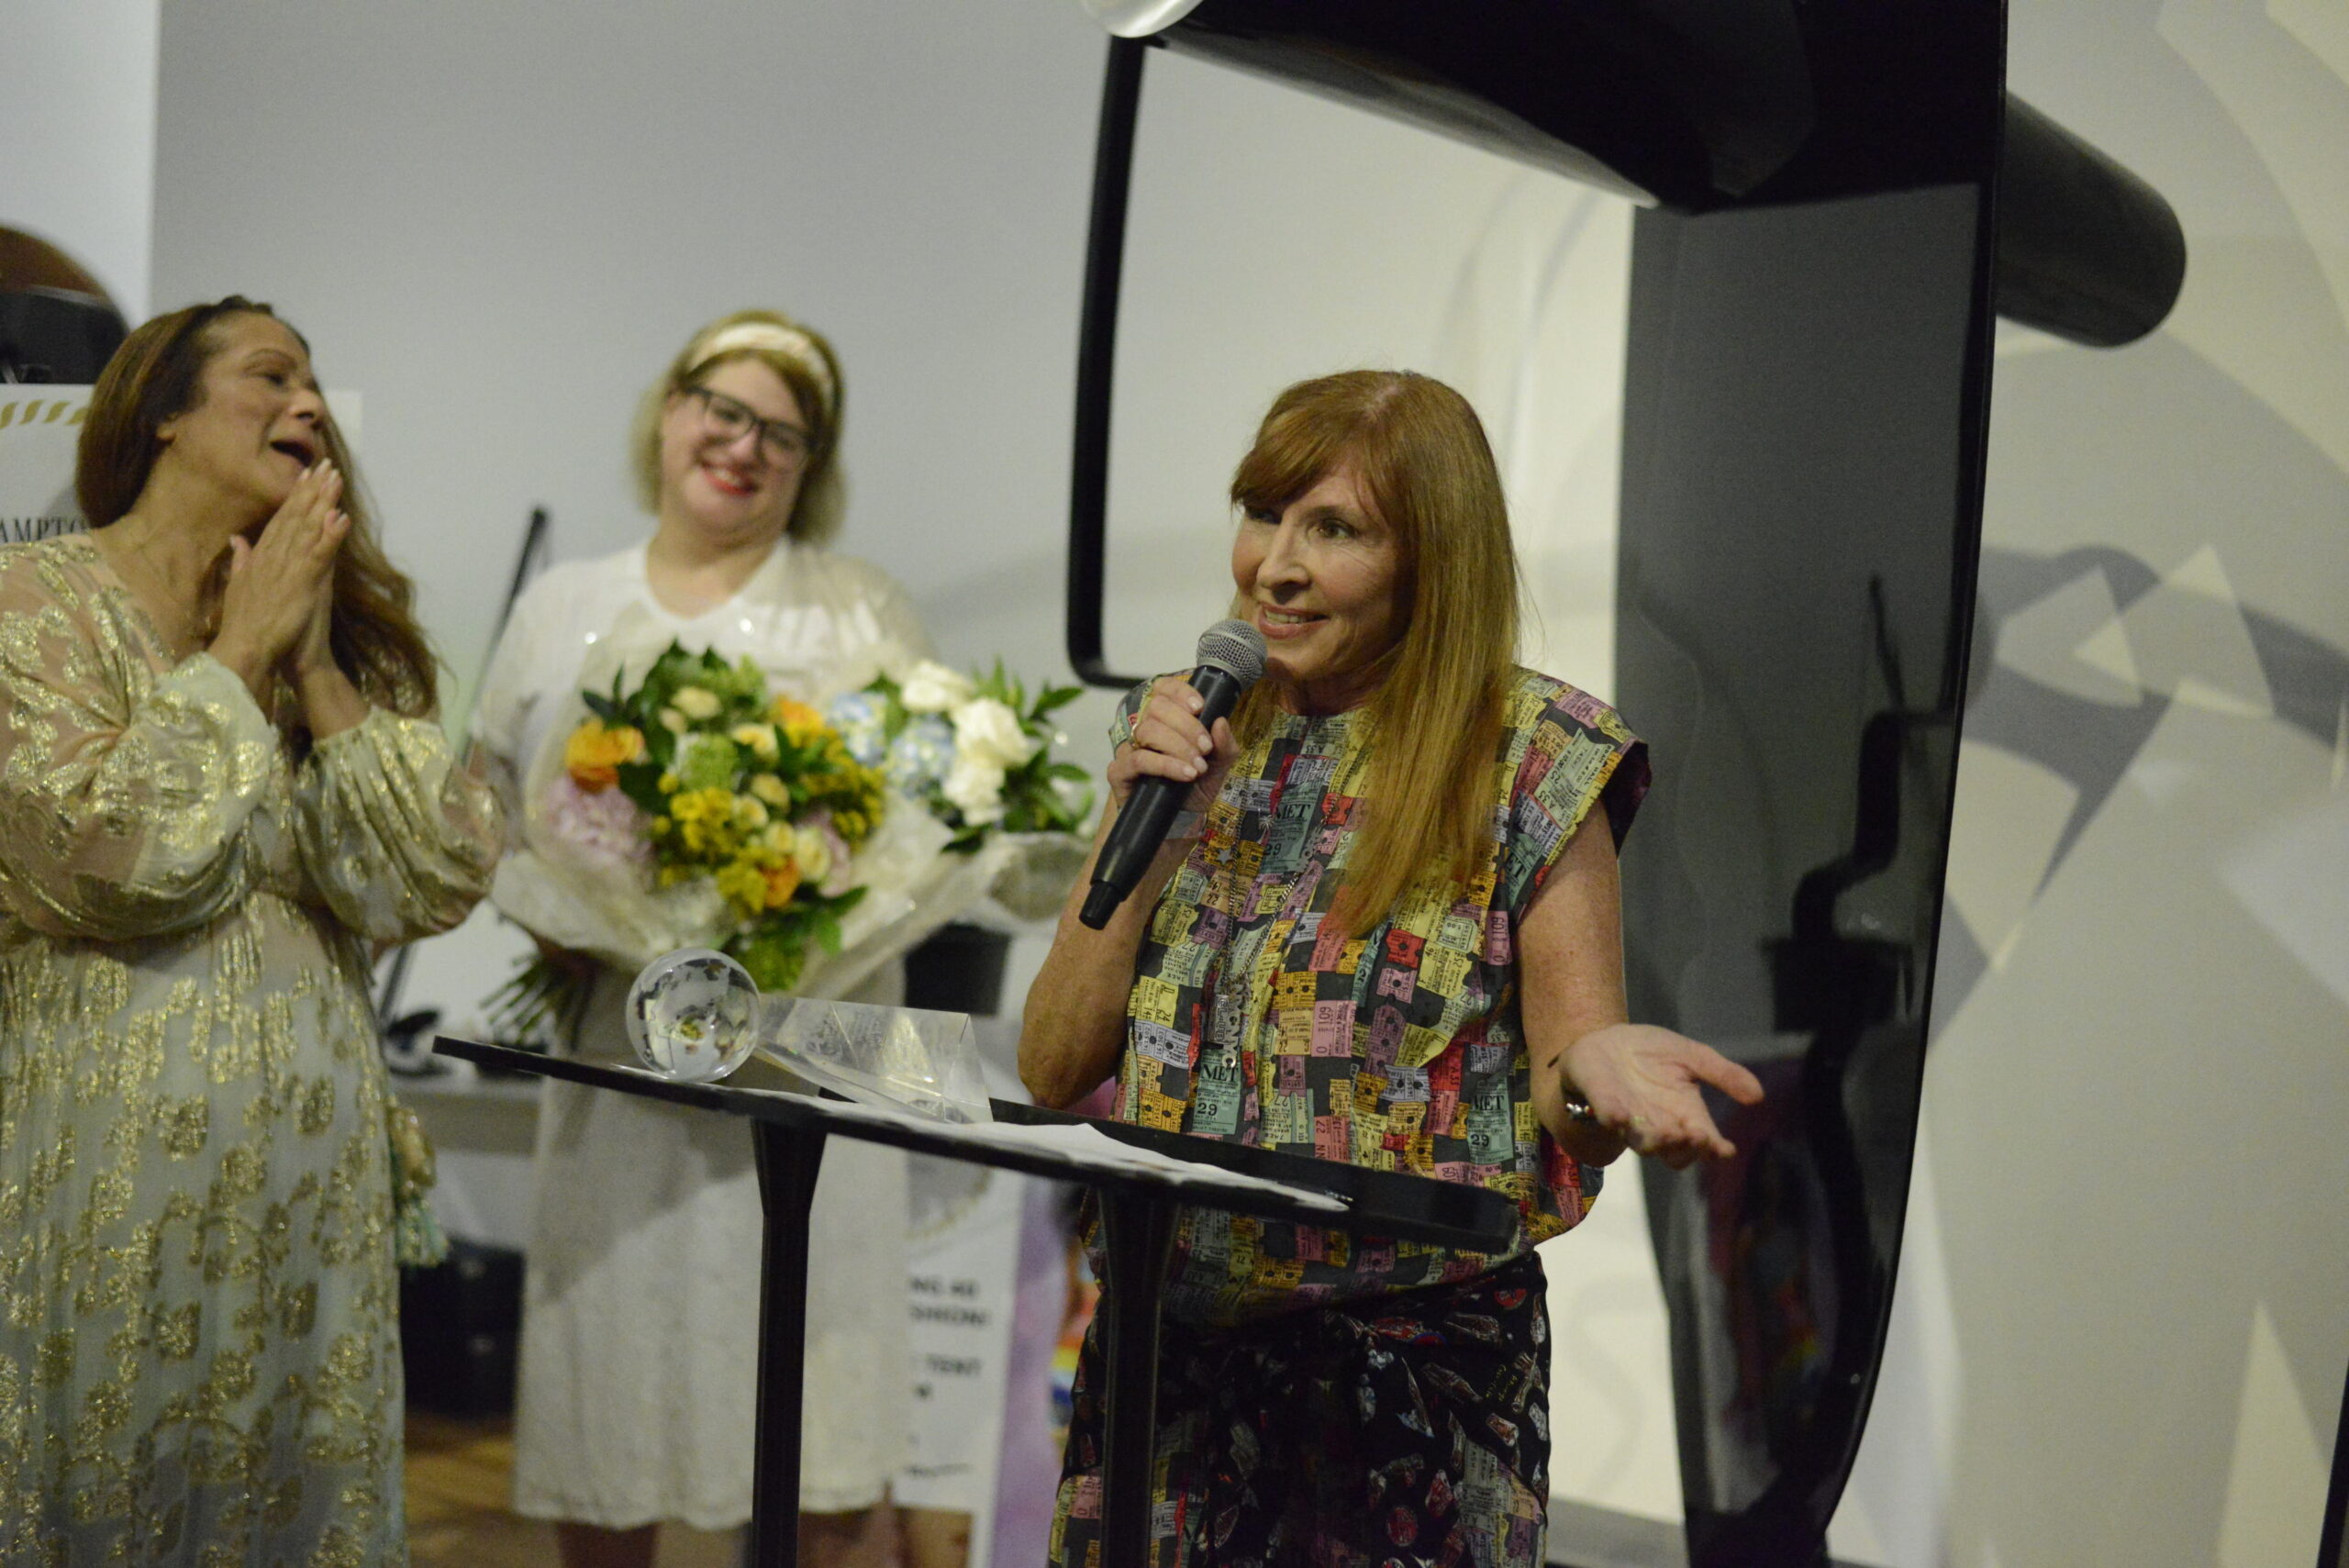 Nicole Miller was honored for her career as a designer with the Designer of the Year award. JULIA HEMING